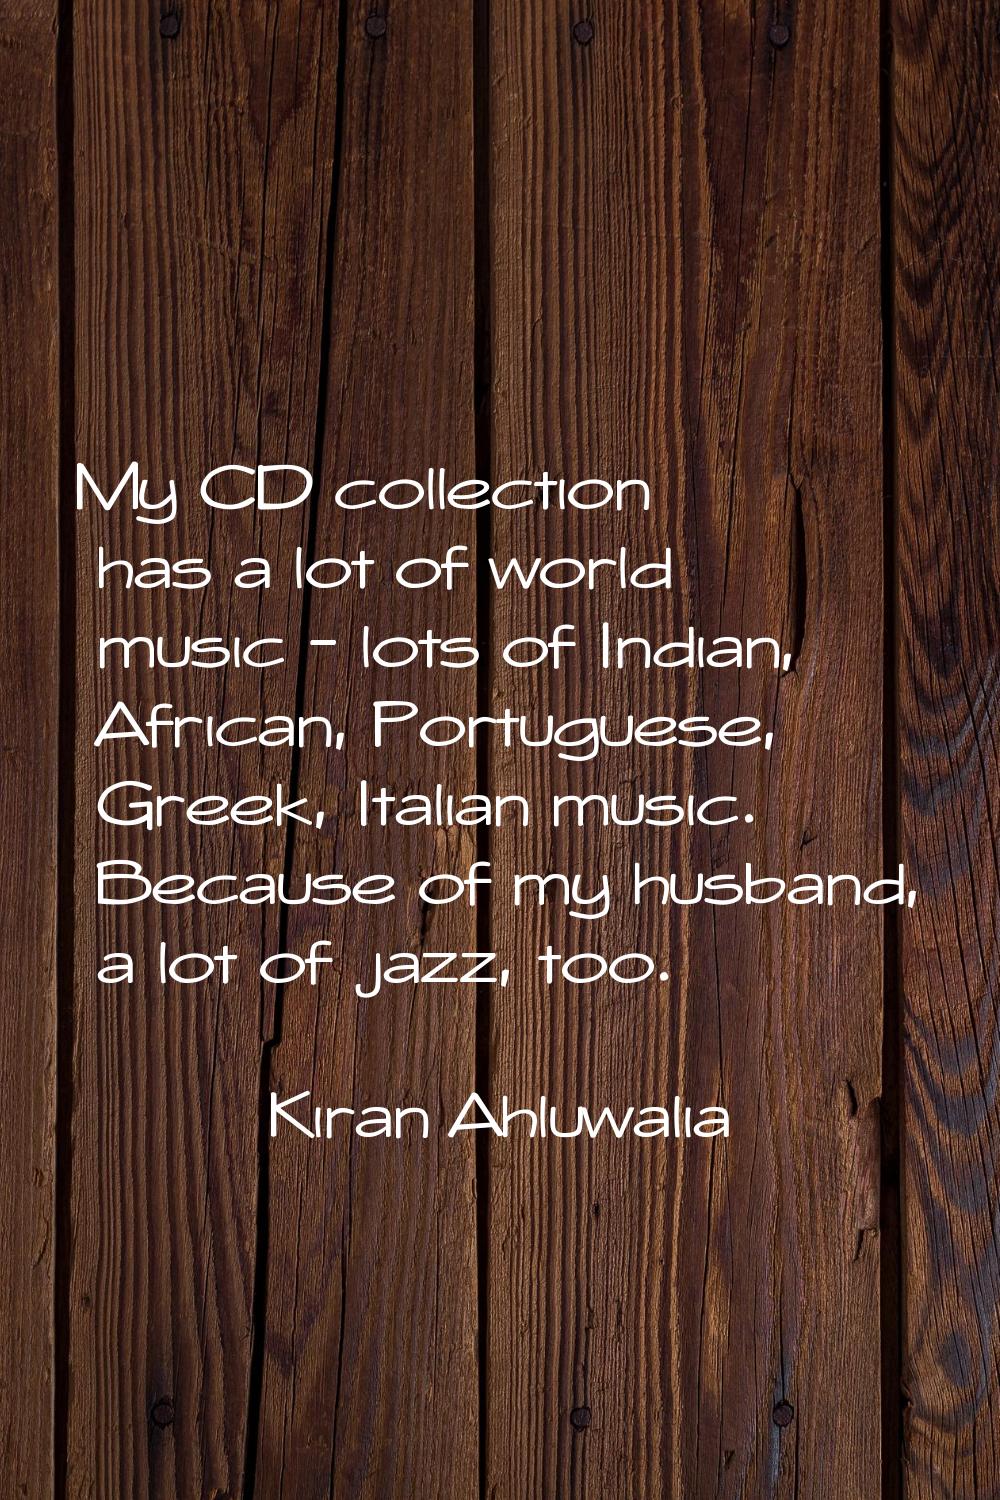 My CD collection has a lot of world music - lots of Indian, African, Portuguese, Greek, Italian mus